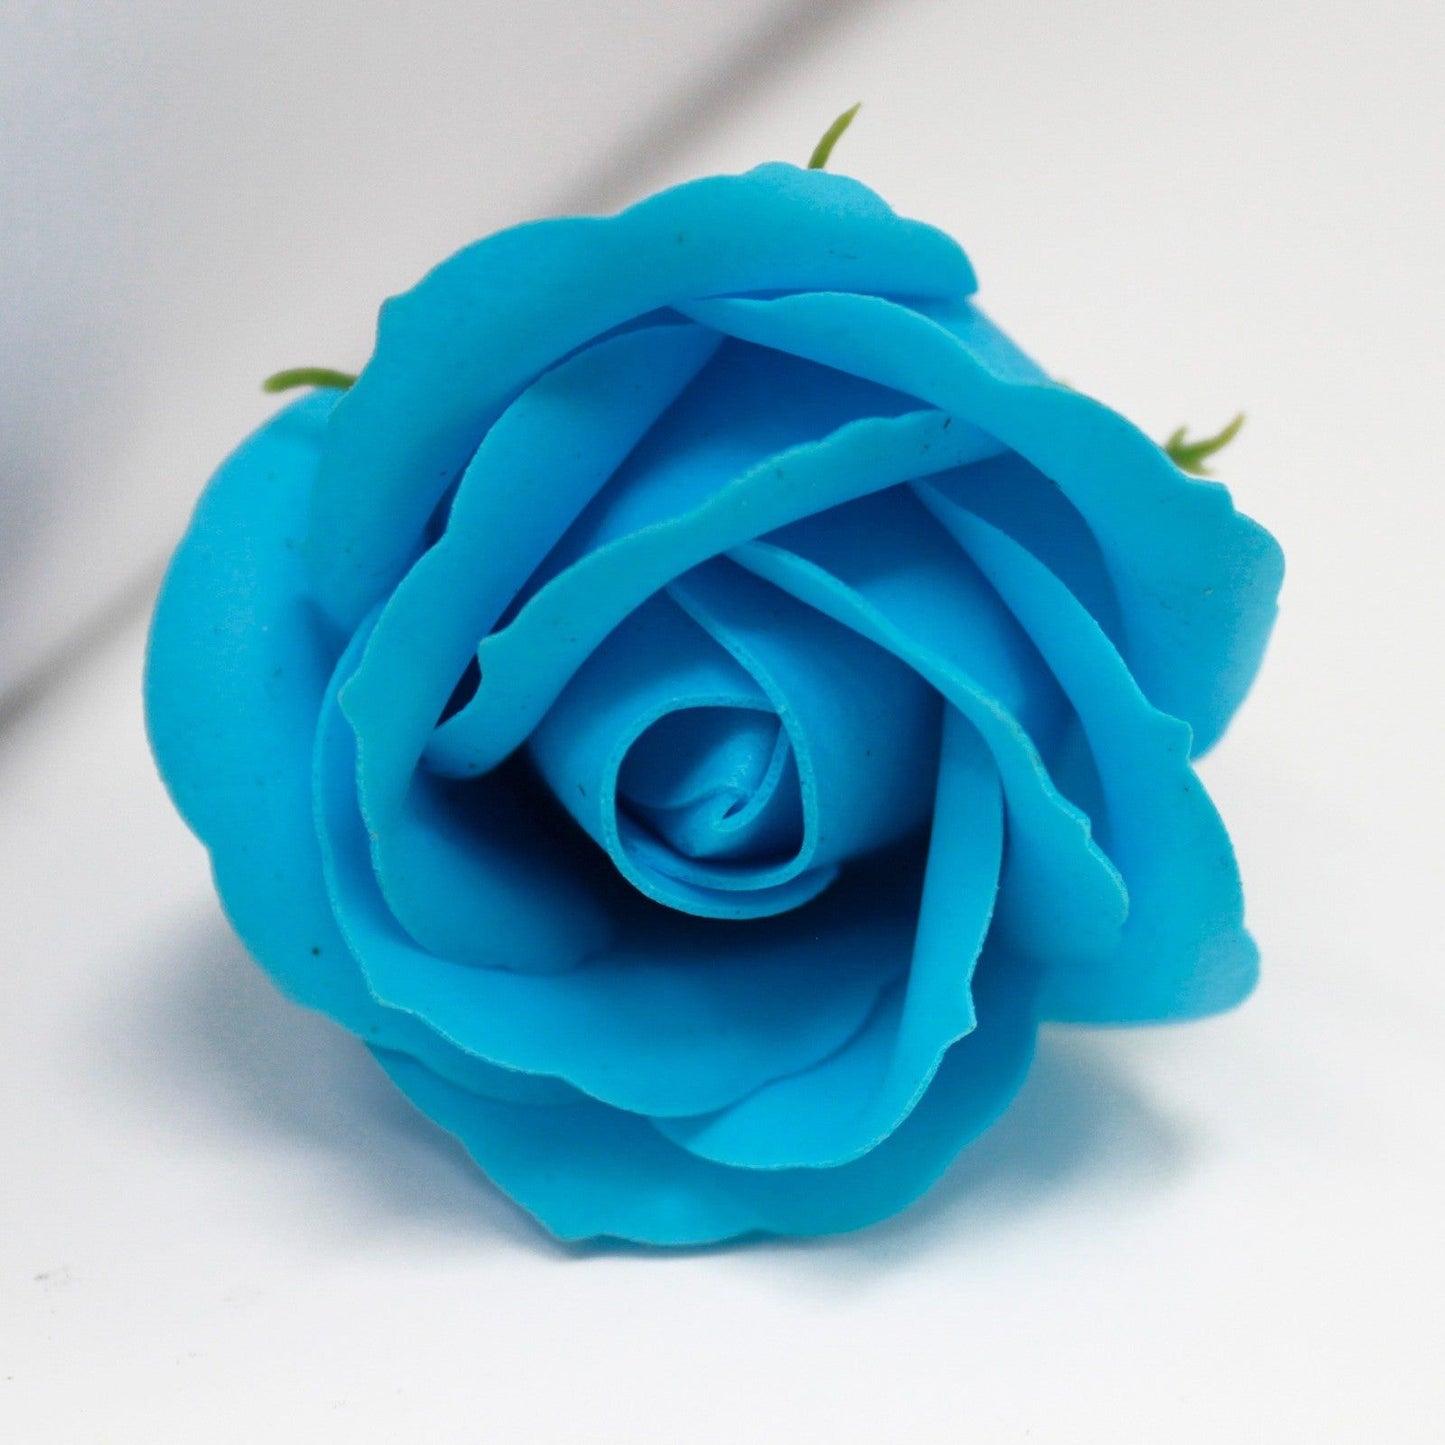 Craft Soap Flowers - Med Rose - Sky Blue x 10 - Ashton and Finch